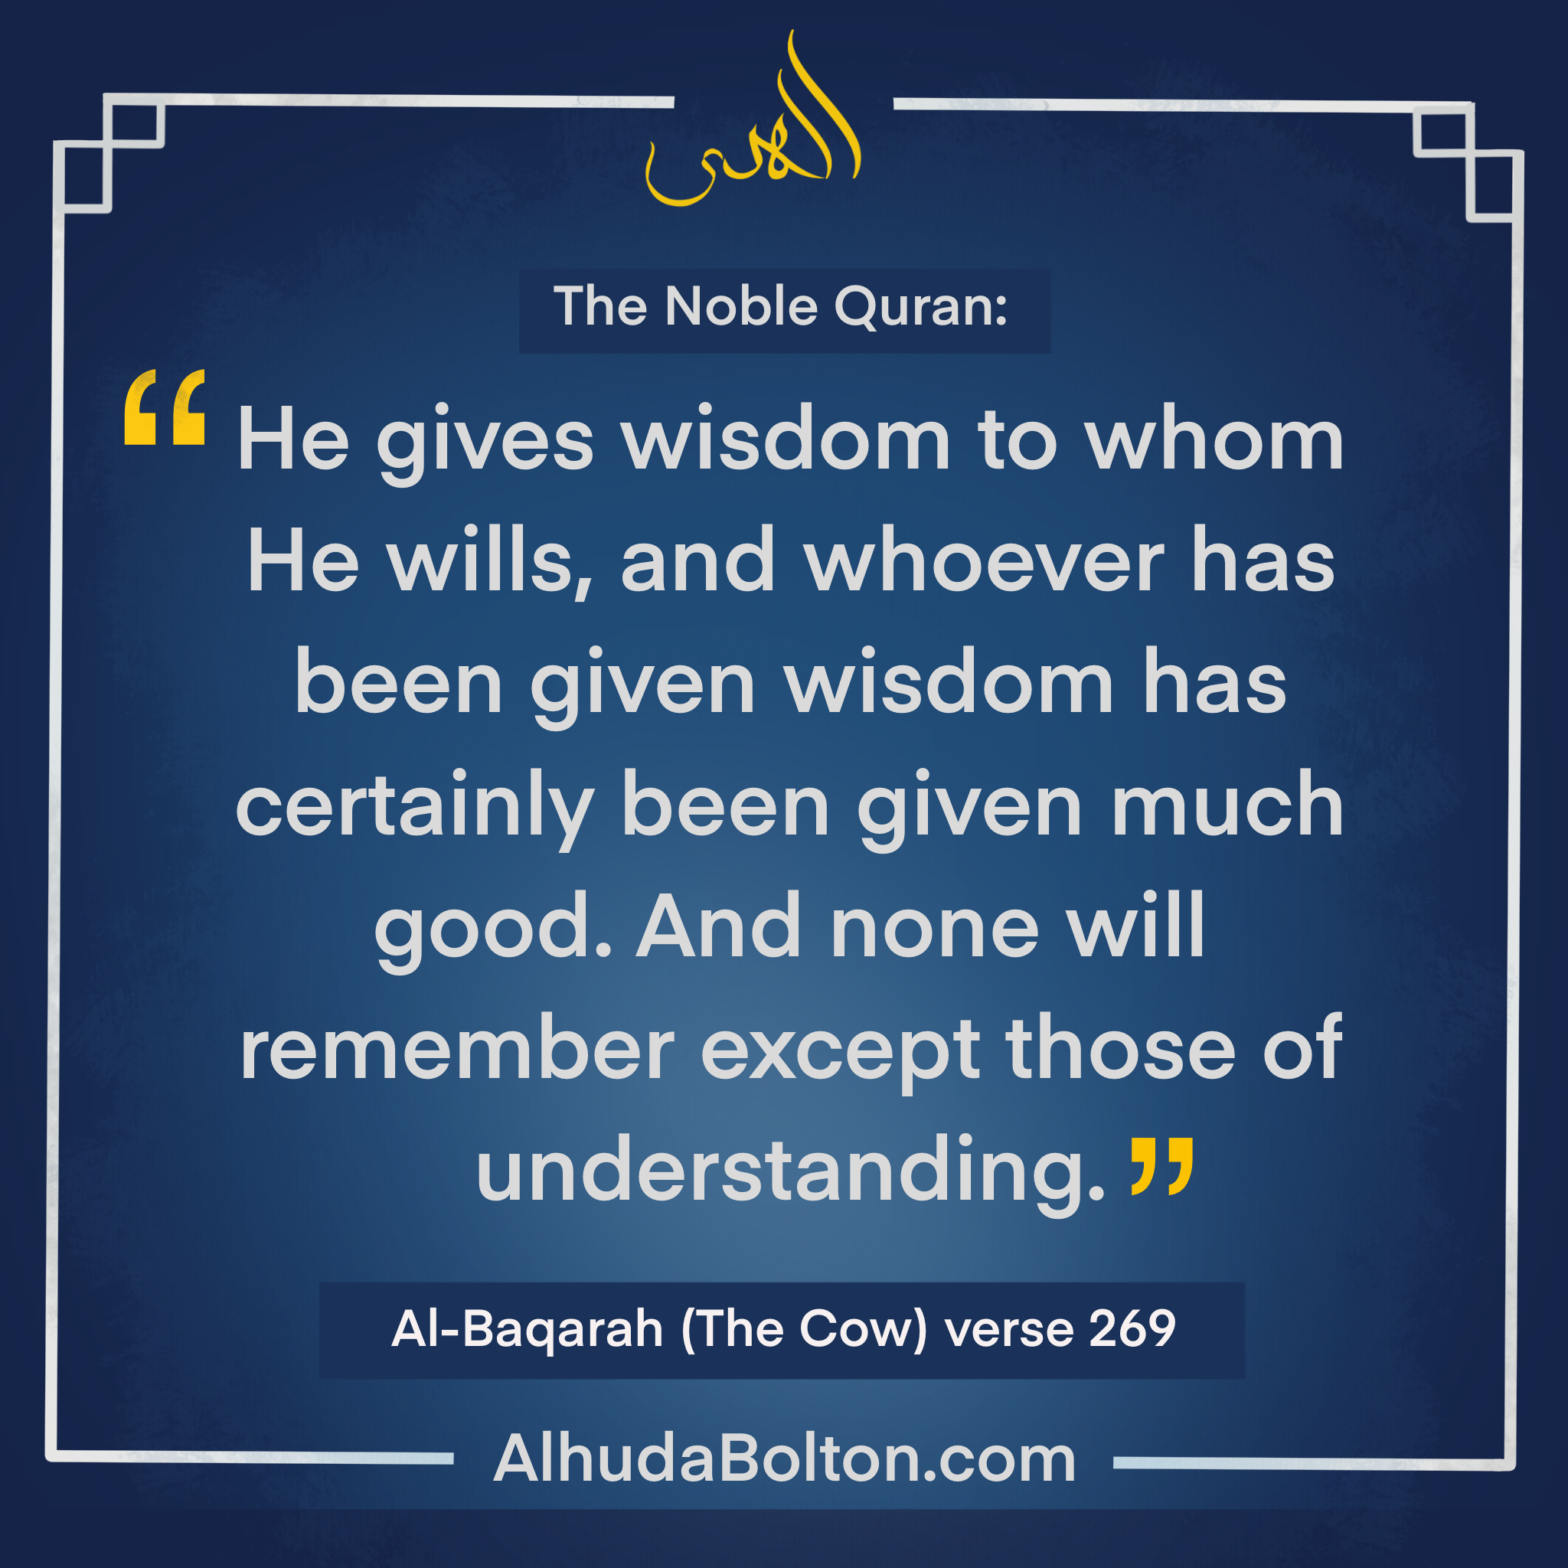 Quran: “and whoever has been given wisdom…”